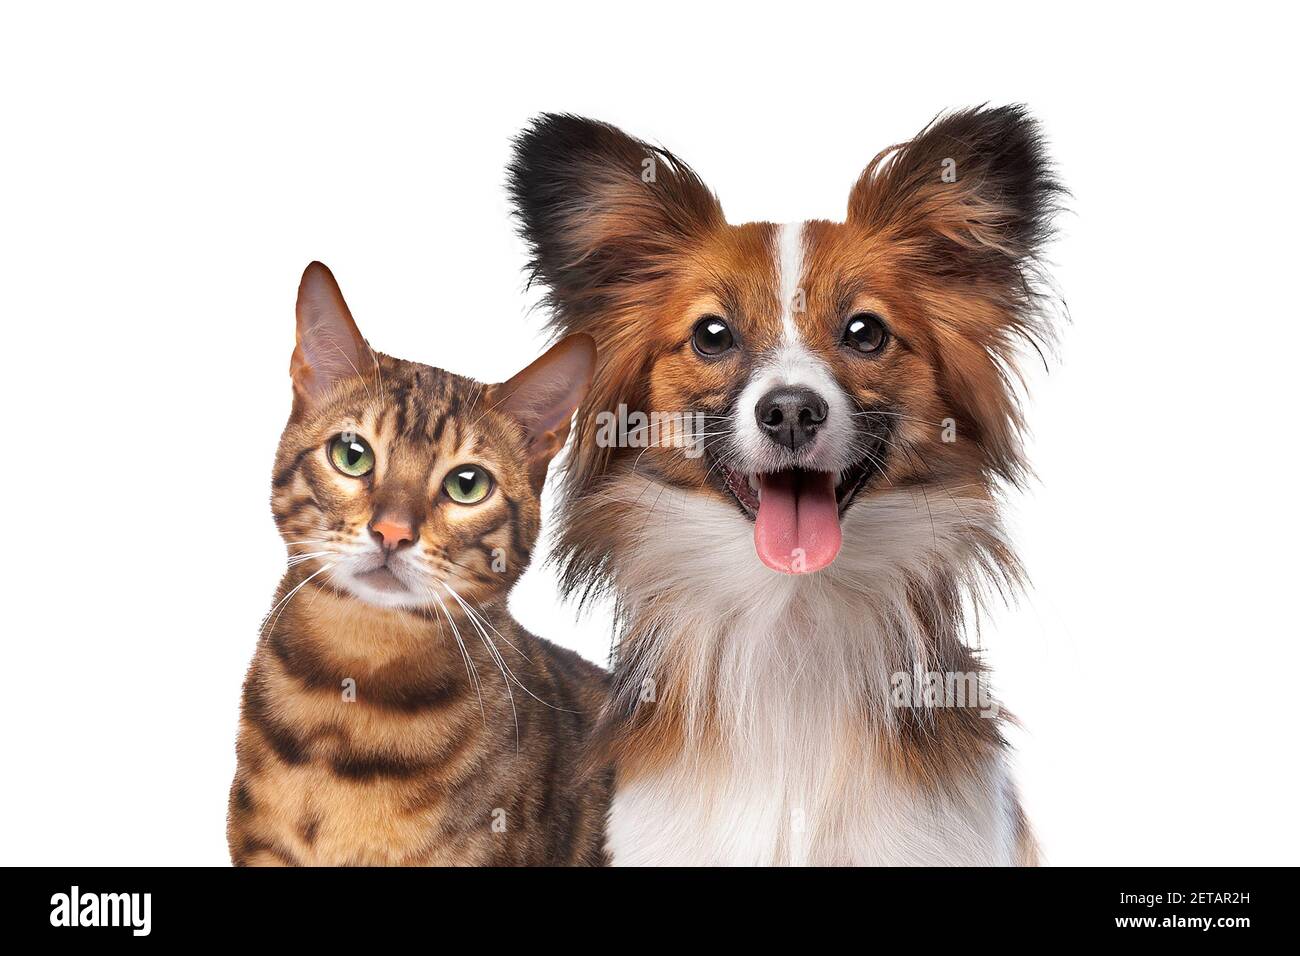 portrait of a dog and a cat looking at the camera in front of a white background Stock Photo